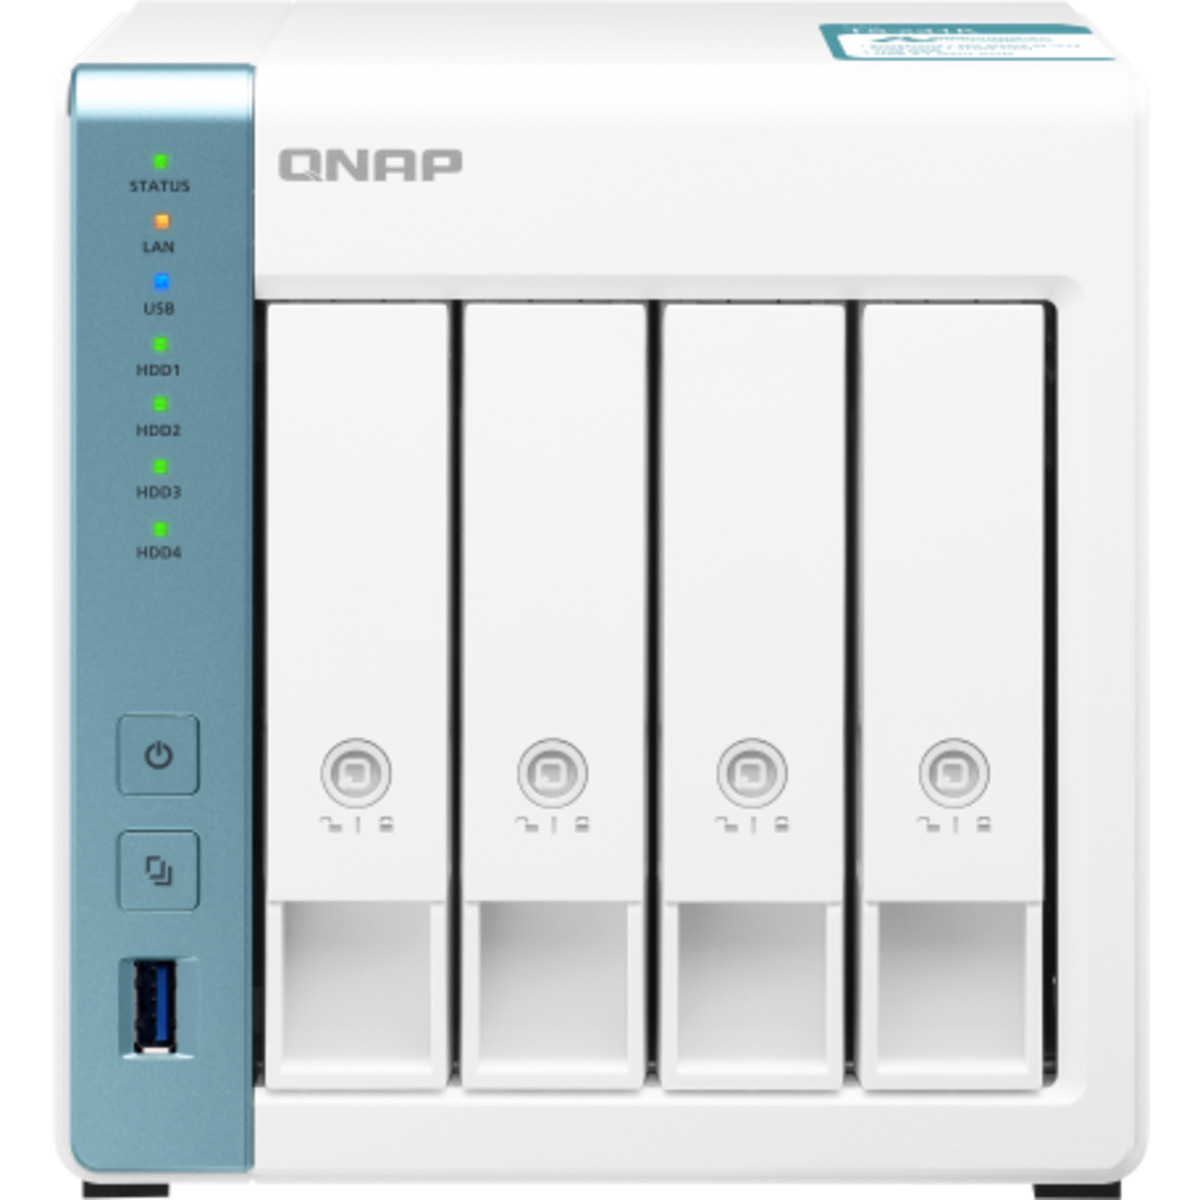 buy $1427 QNAP TS-431K 32tb Desktop NAS - Network Attached Storage Device 4x8000gb Seagate EXOS ST8000NM000A 3.5 7200rpm SATA 6Gb/s HDD ENTERPRISE Class Drives Installed - Burn-In Tested - nas headquarters buy network attached storage server device das new raid-5 free shipping usa christmas new year holiday sale TS-431K